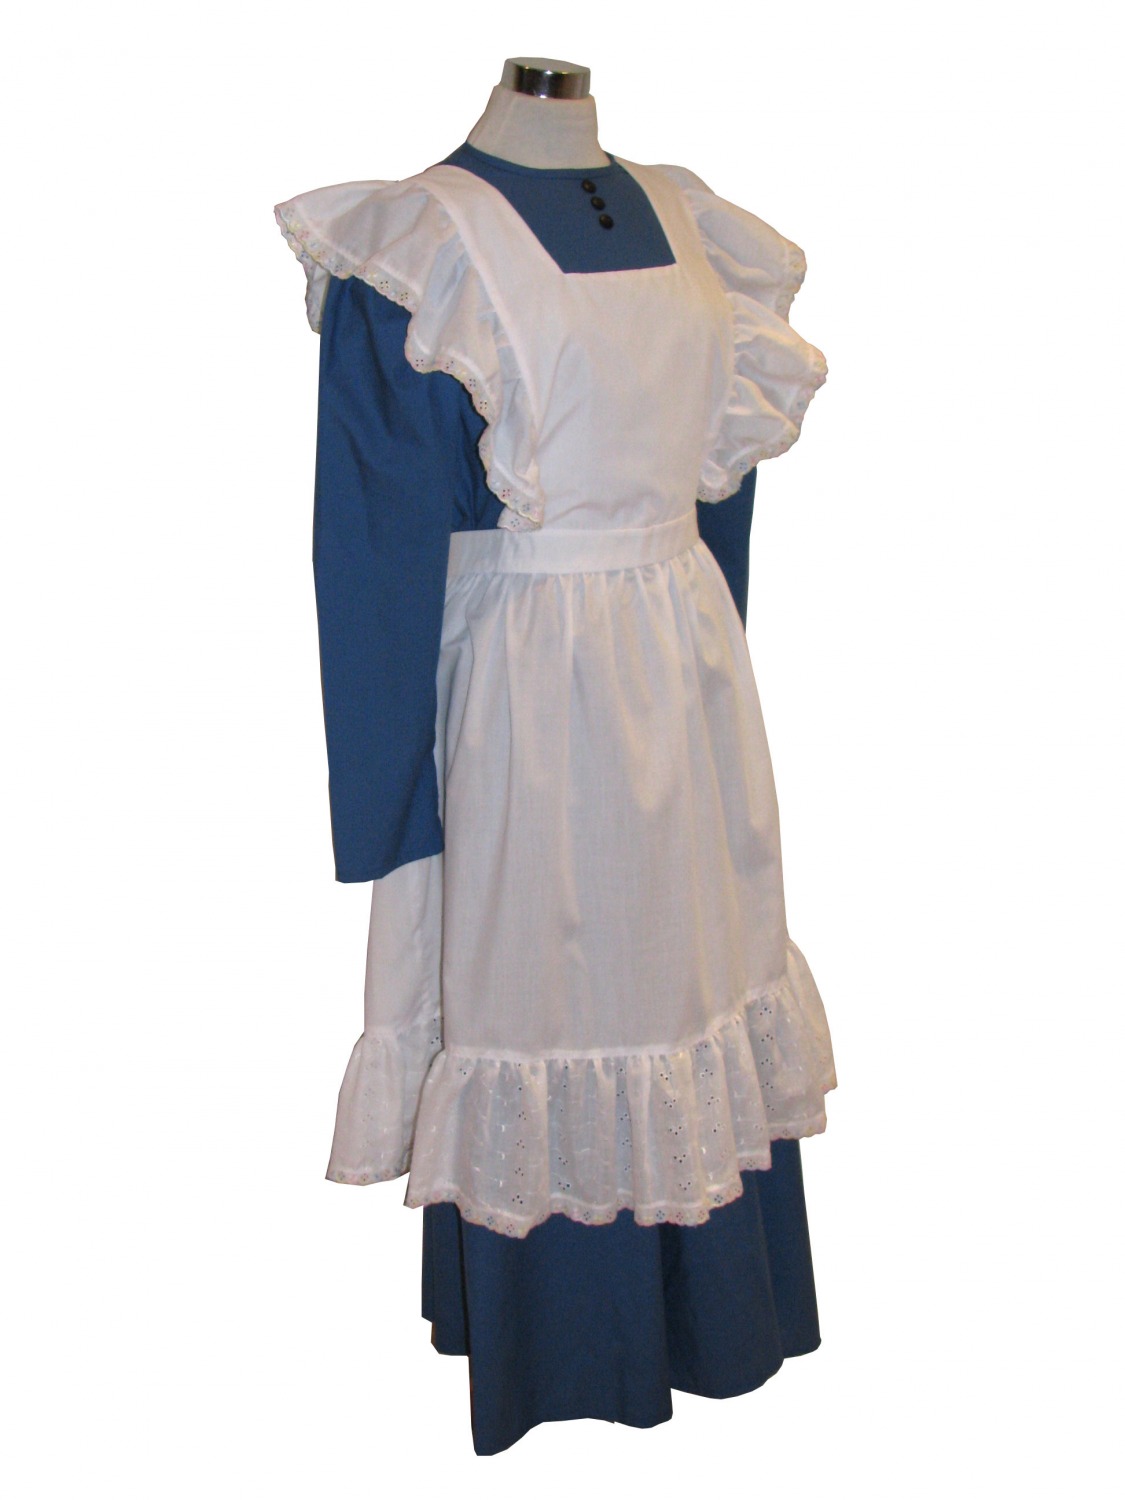 Ladies Victorian Edwardian Maid Costume Size 16 18 Complete Costumes Costume Hire 